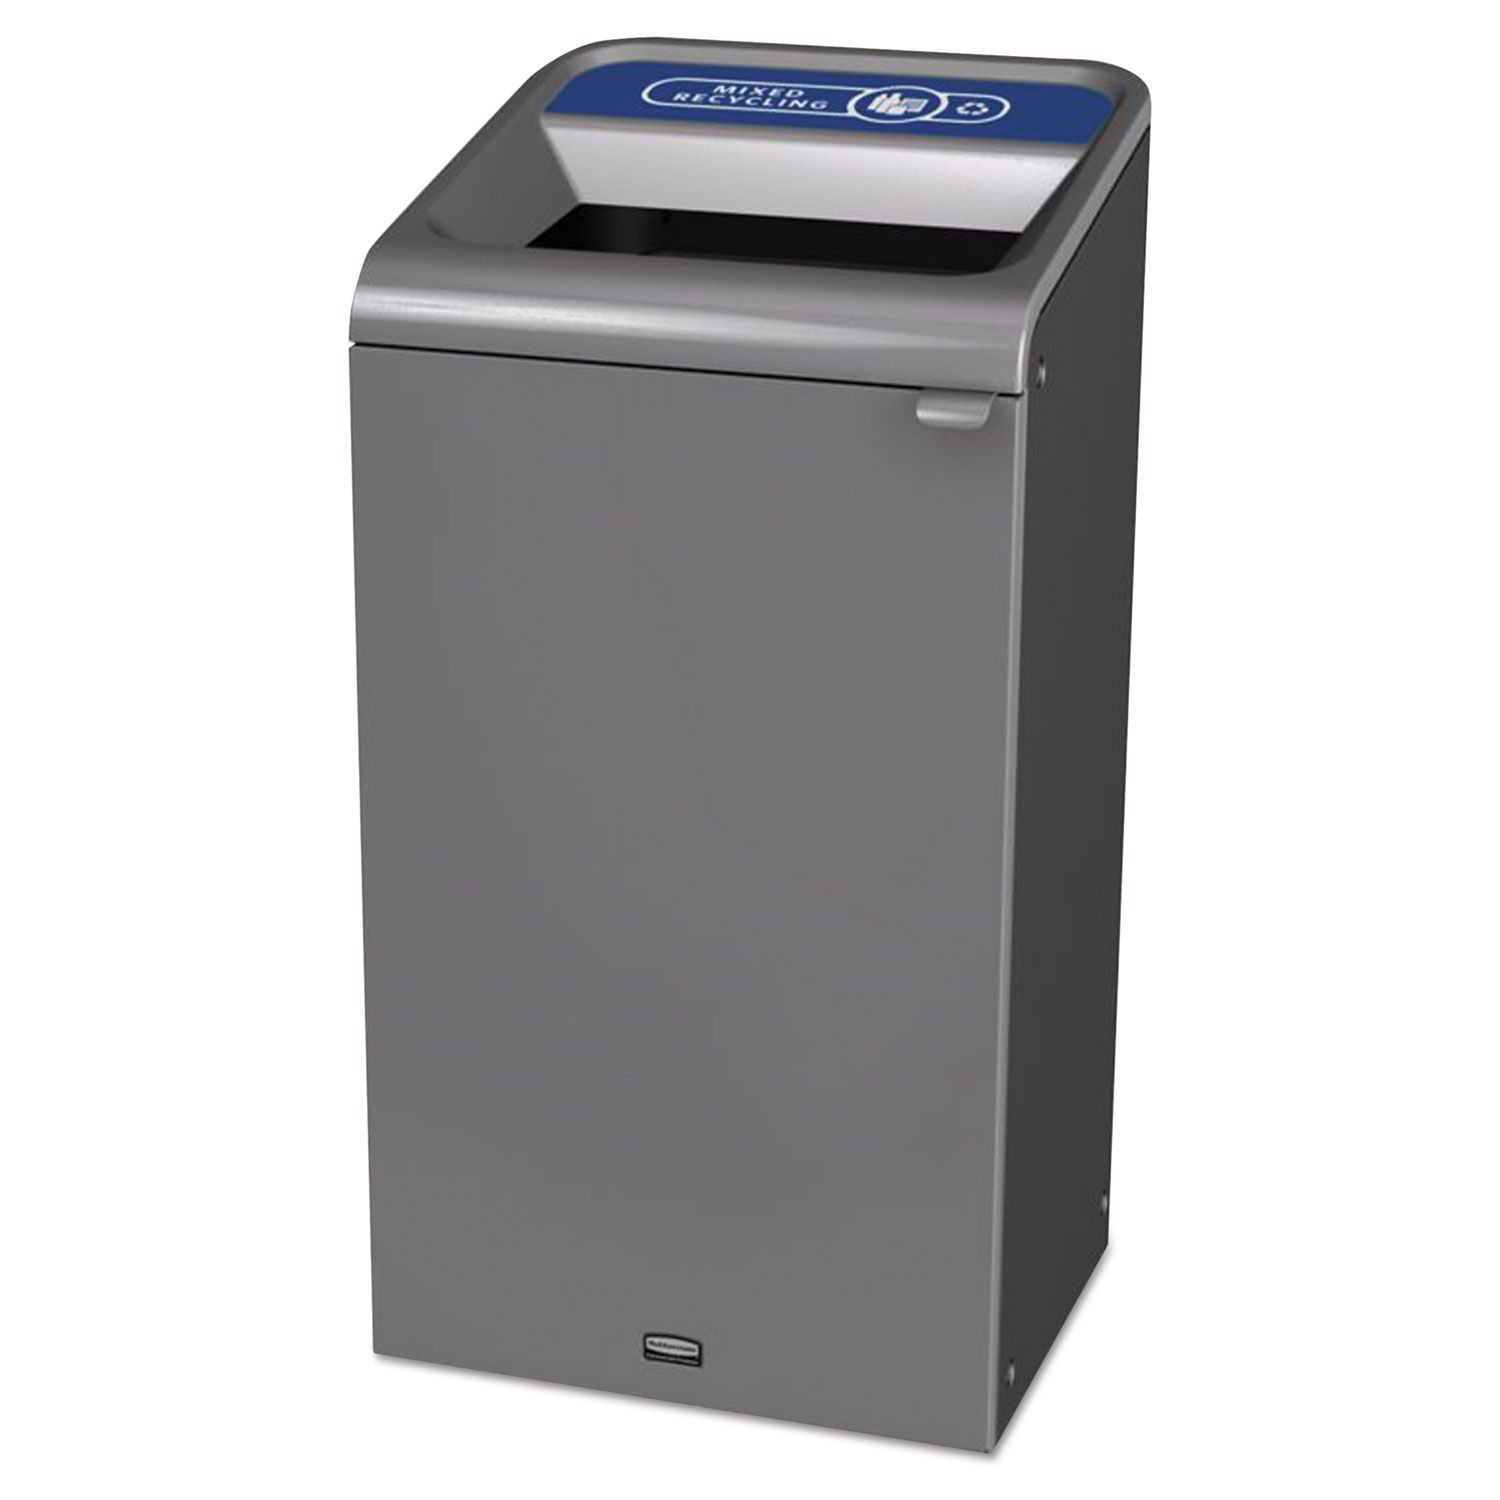 Configure Indoor Recycling Waste Receptacle Mixed Recycling, 23 gal, Metal, Gray